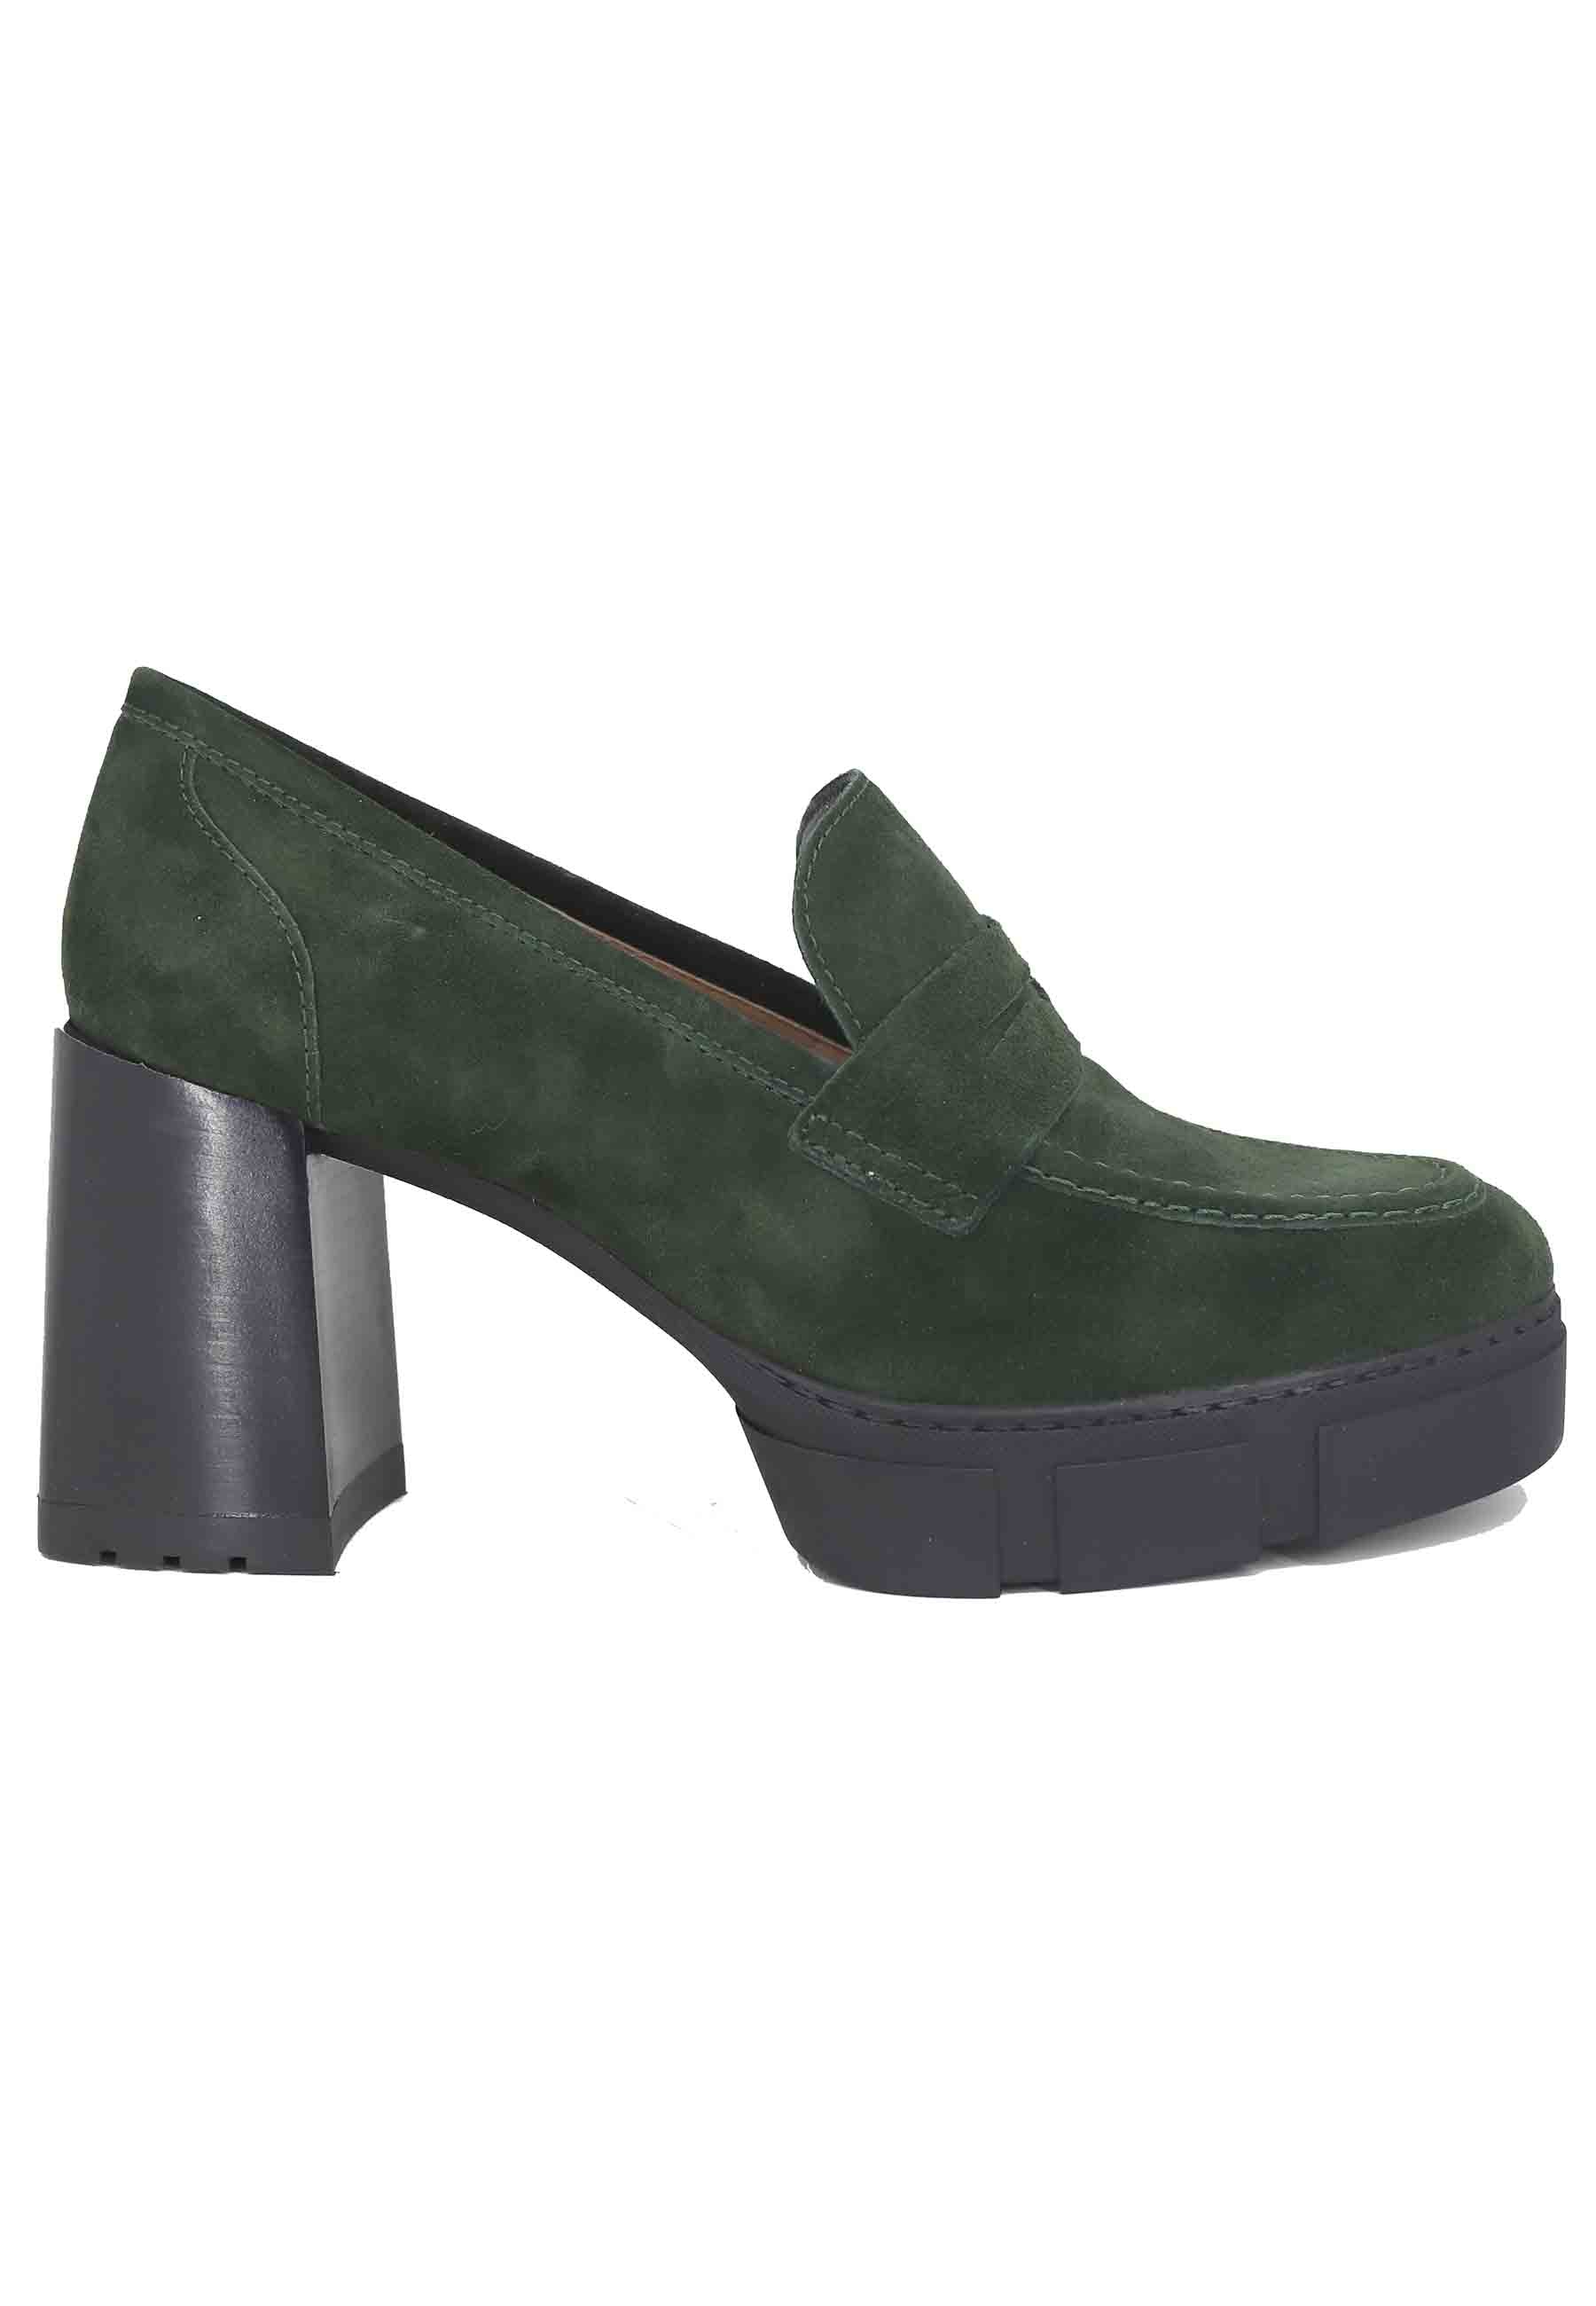 Women's moccasins in green suede with high heel and plateau